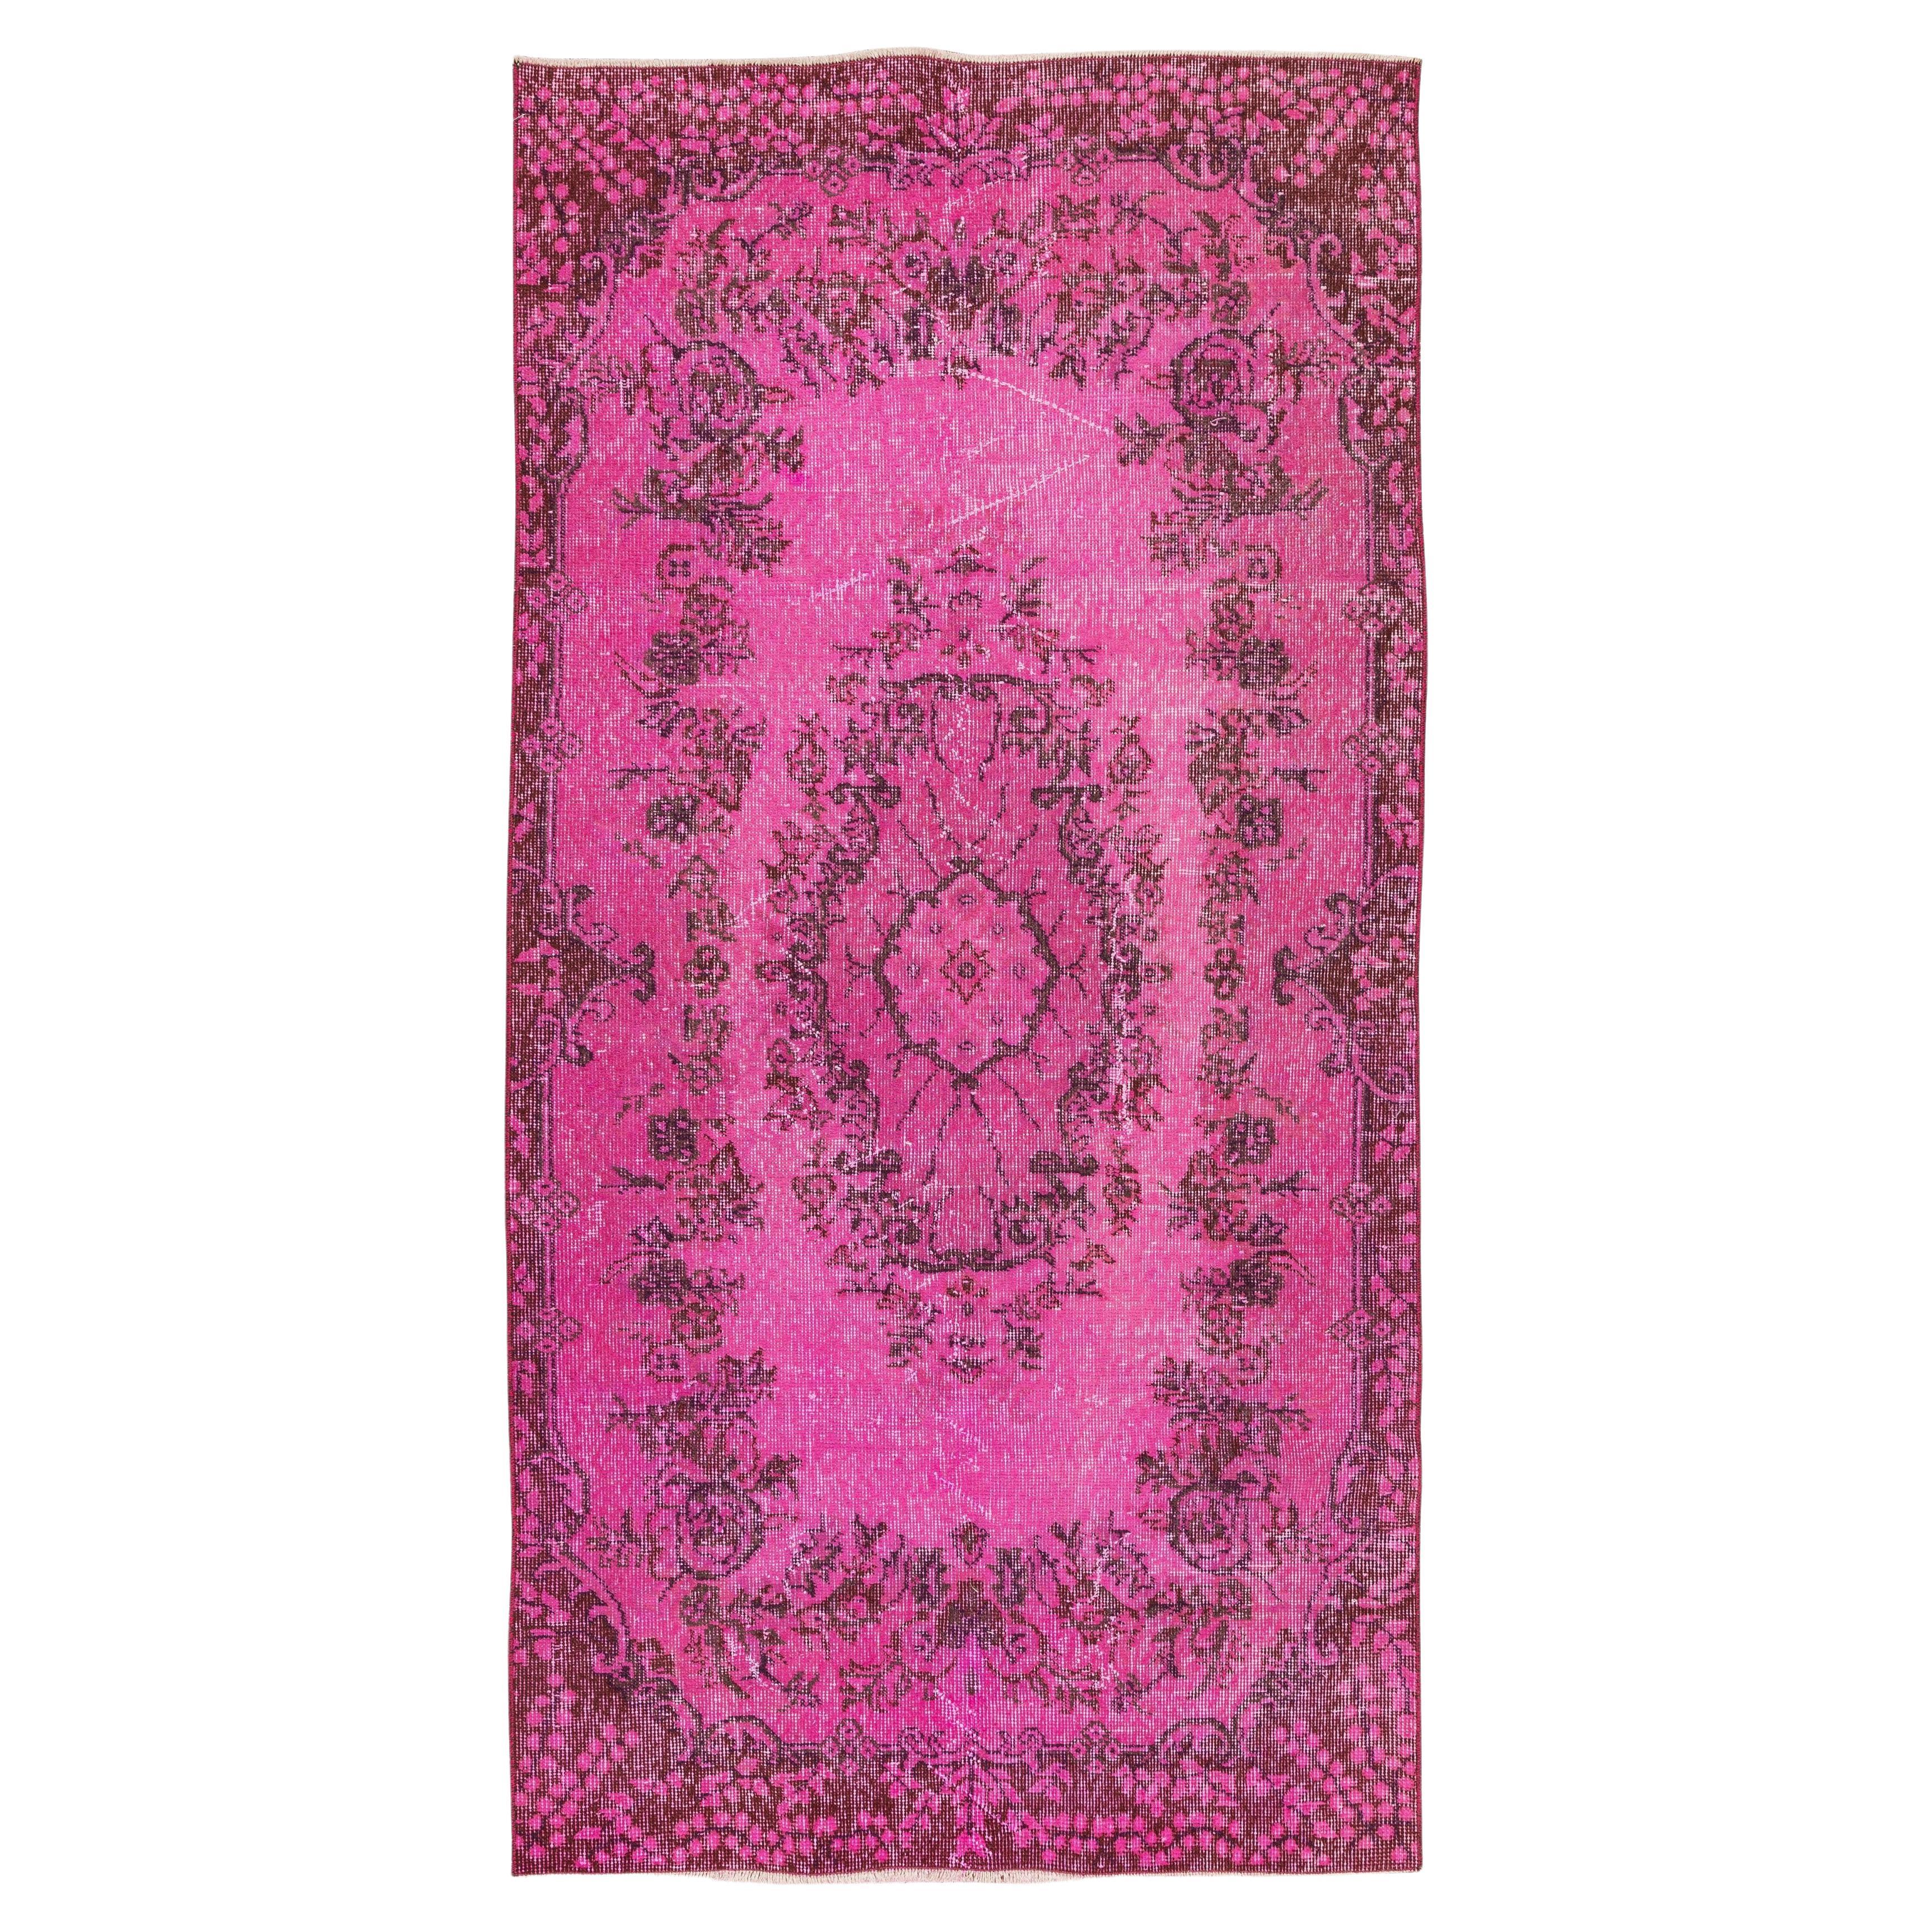 Handmade Anatolian Accent Rug in Pink with Floral Medallion Design